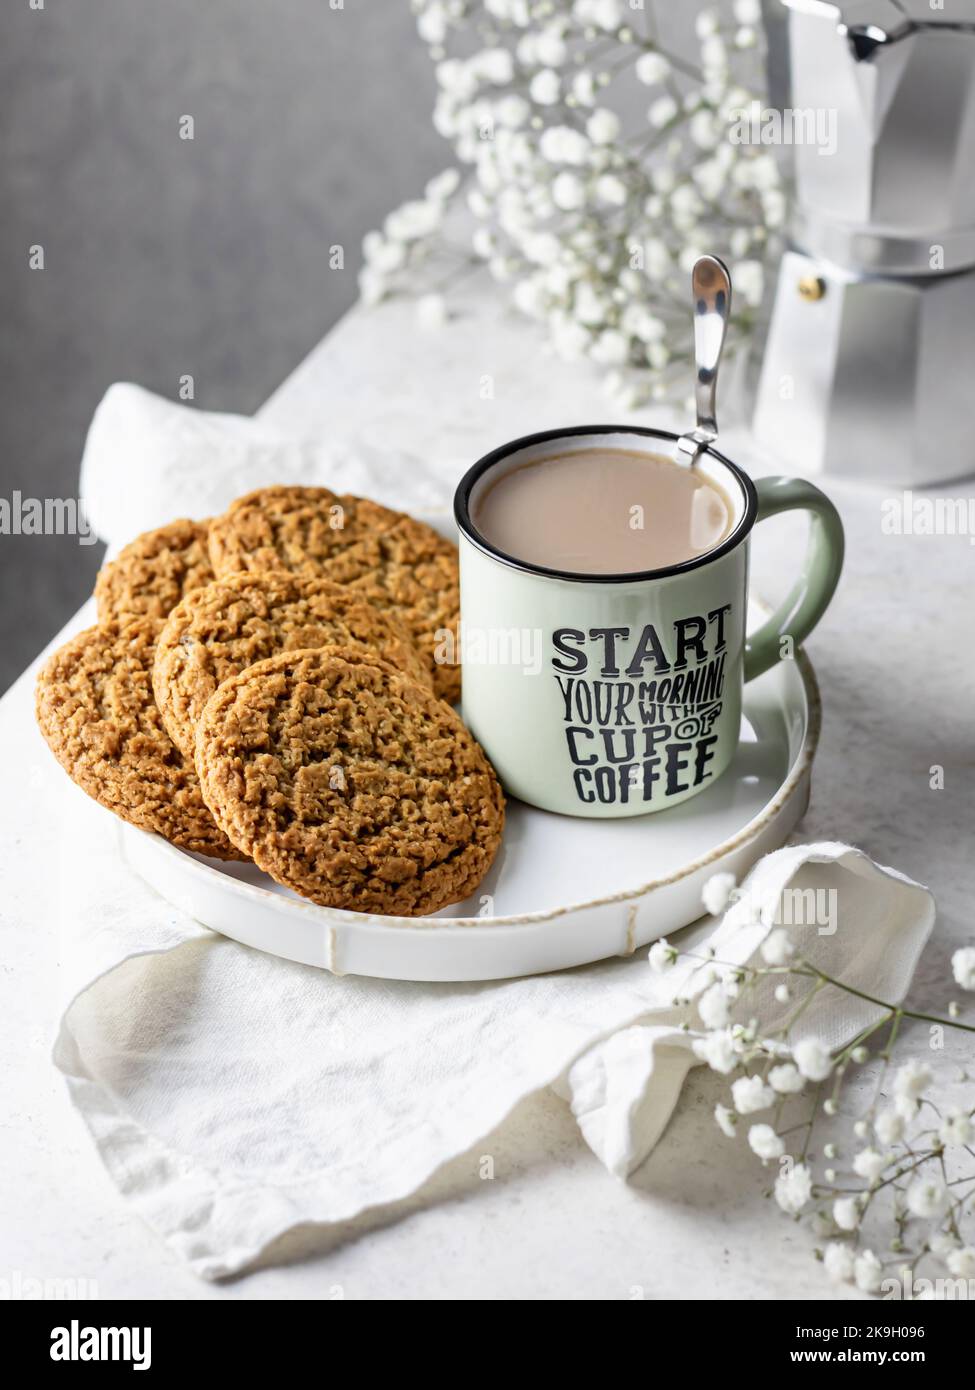 Mug of hot coffee with homemade oatmeal cookies. Home warmth and comfort in autumn morning concept. Autumn still life Stock Photo